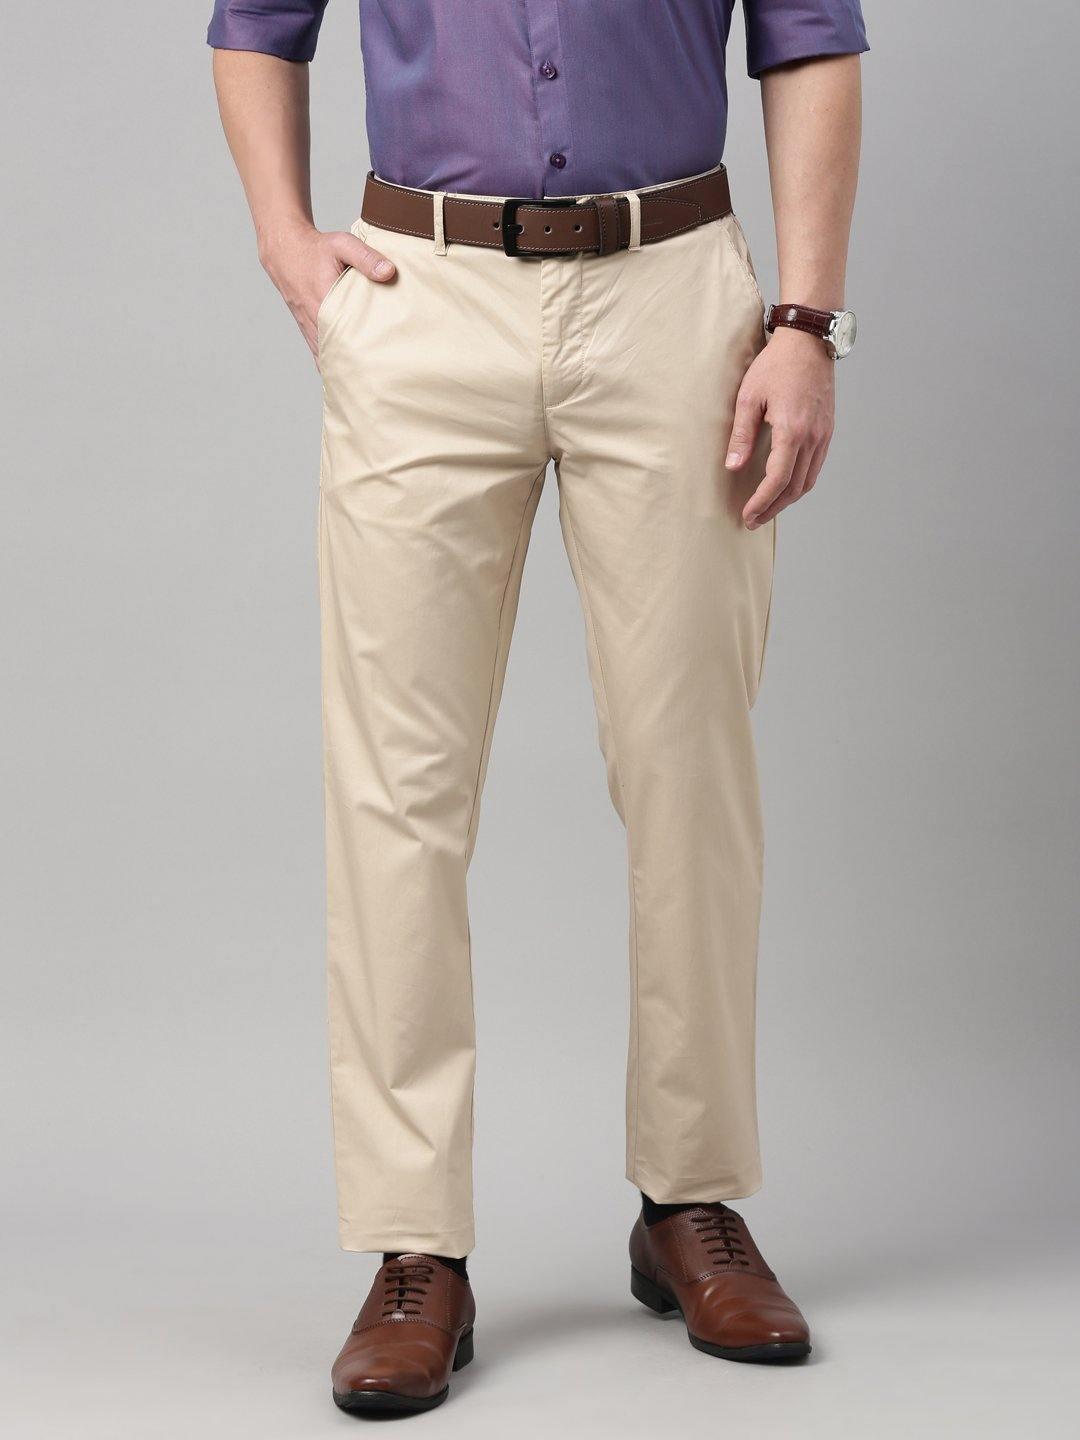 Details more than 136 cheap cotton trousers